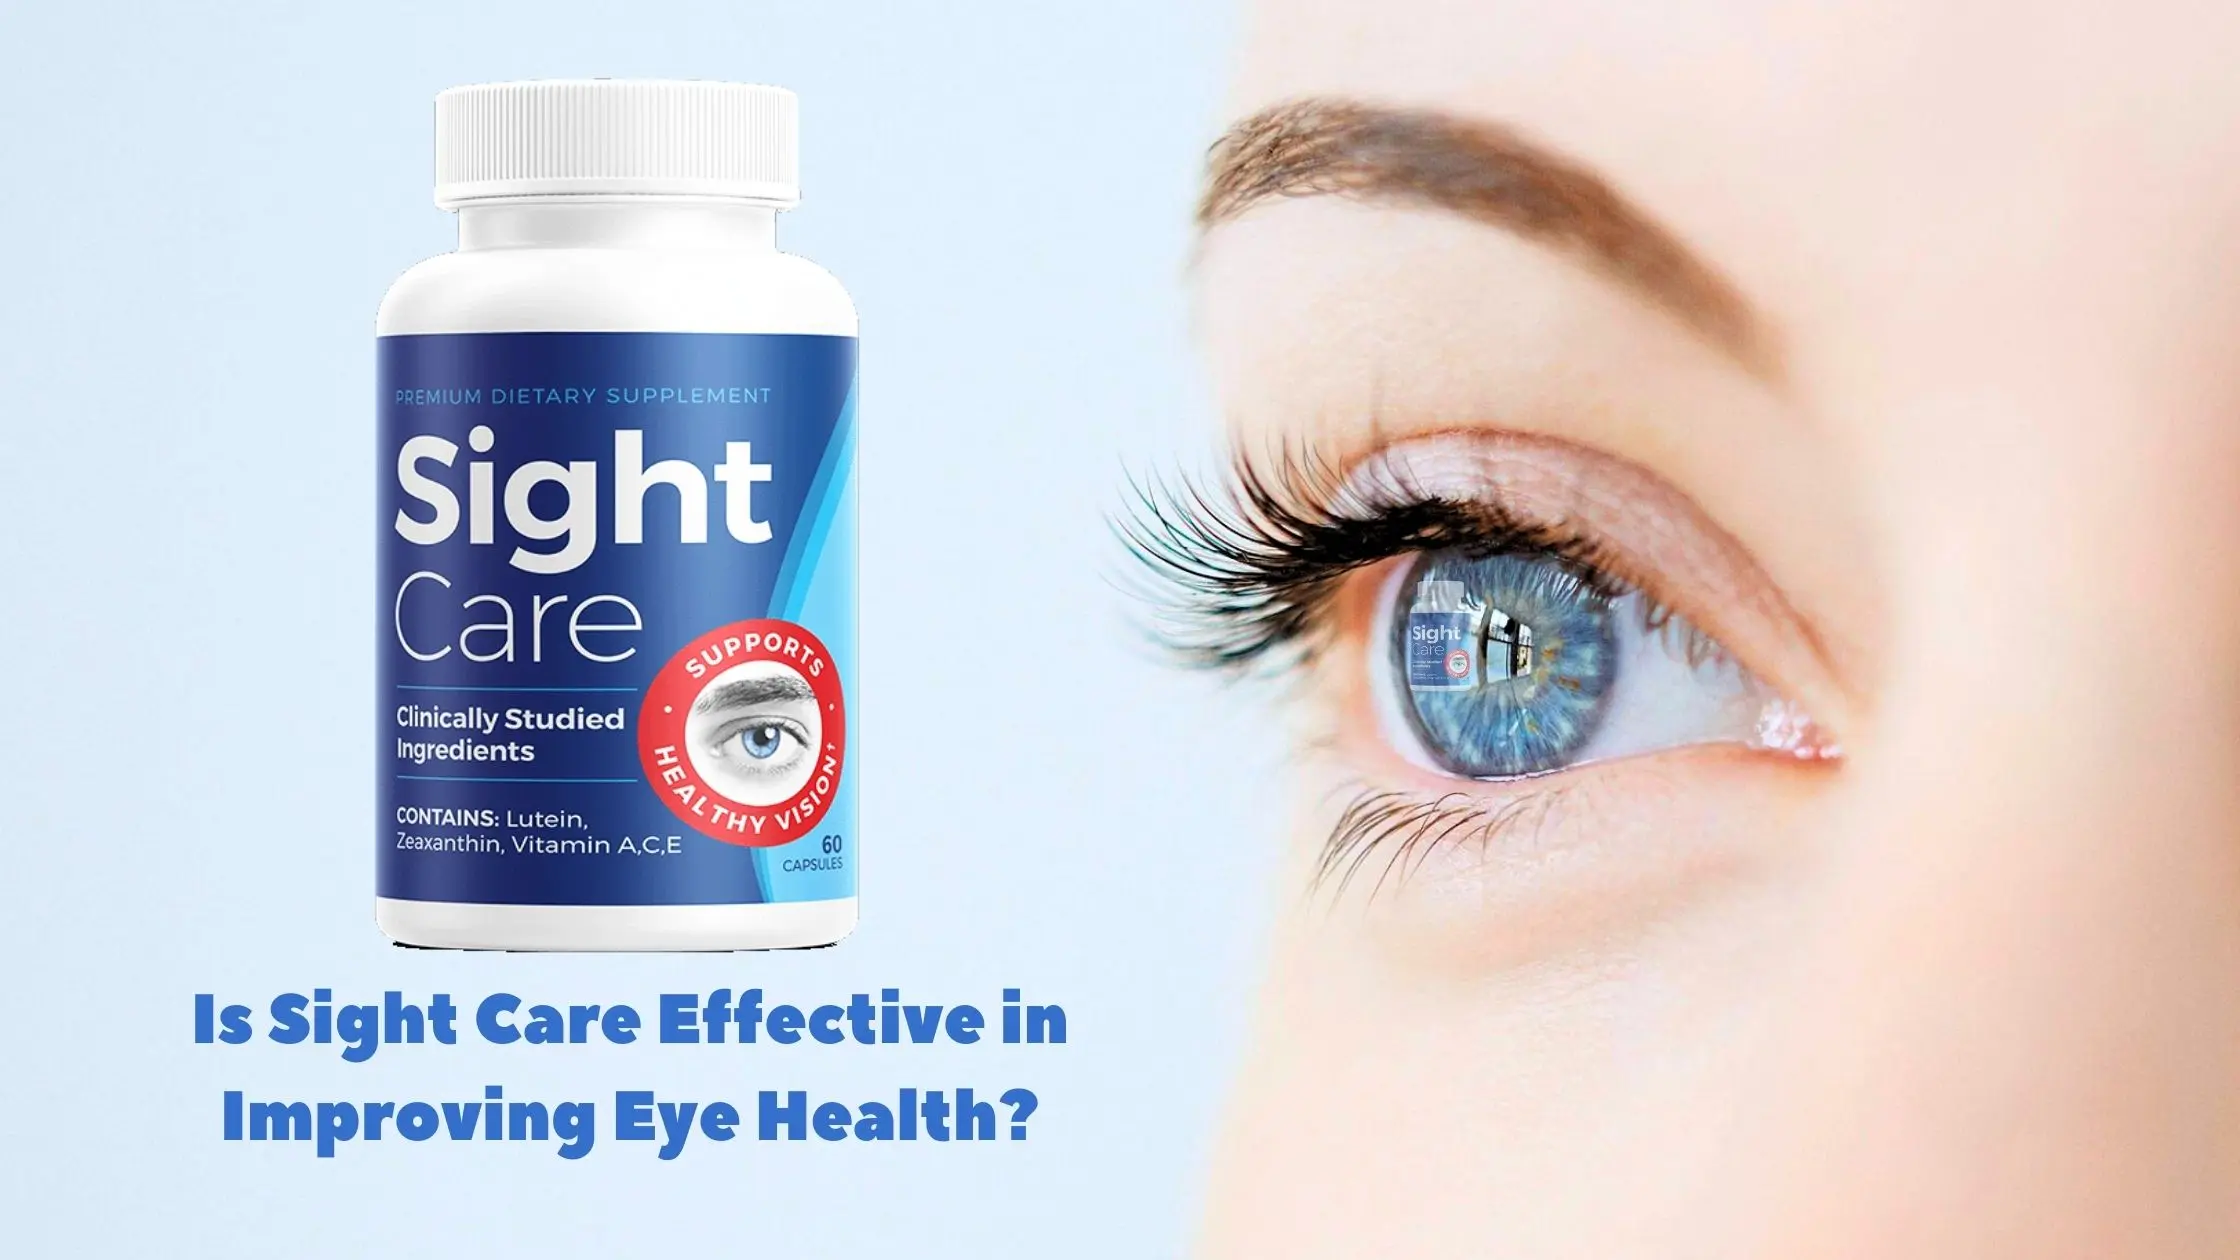 Is Sight Care Effective in Improving Eye Health?